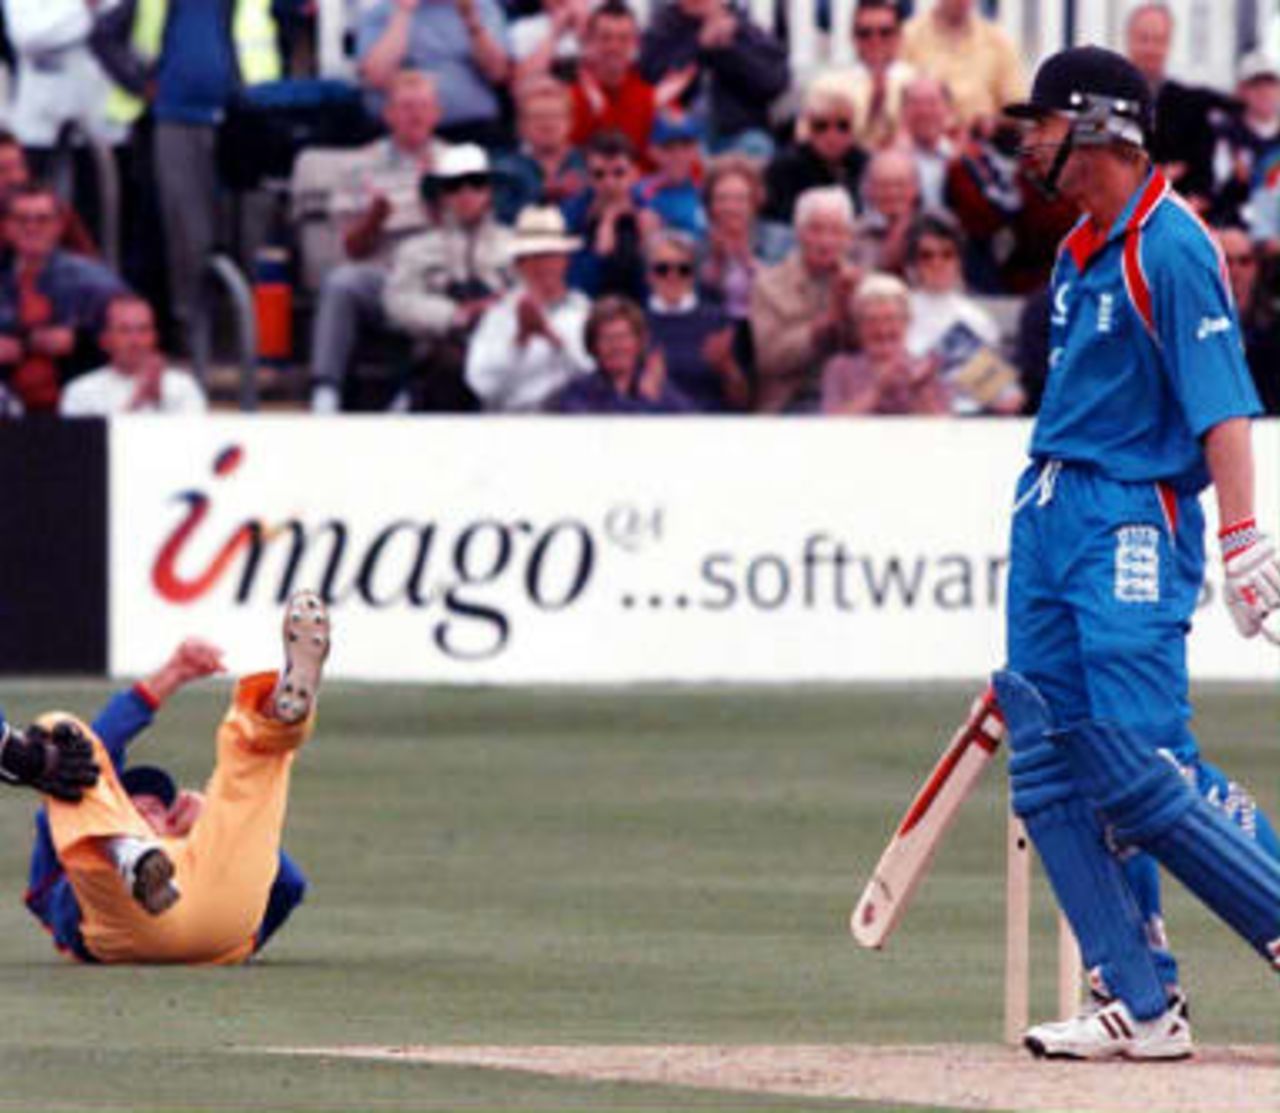 Nick Knight walks off, caught by Law - World Cup warm-up match, England v Essex, Chelmsford, Essex, 09 May 1999.